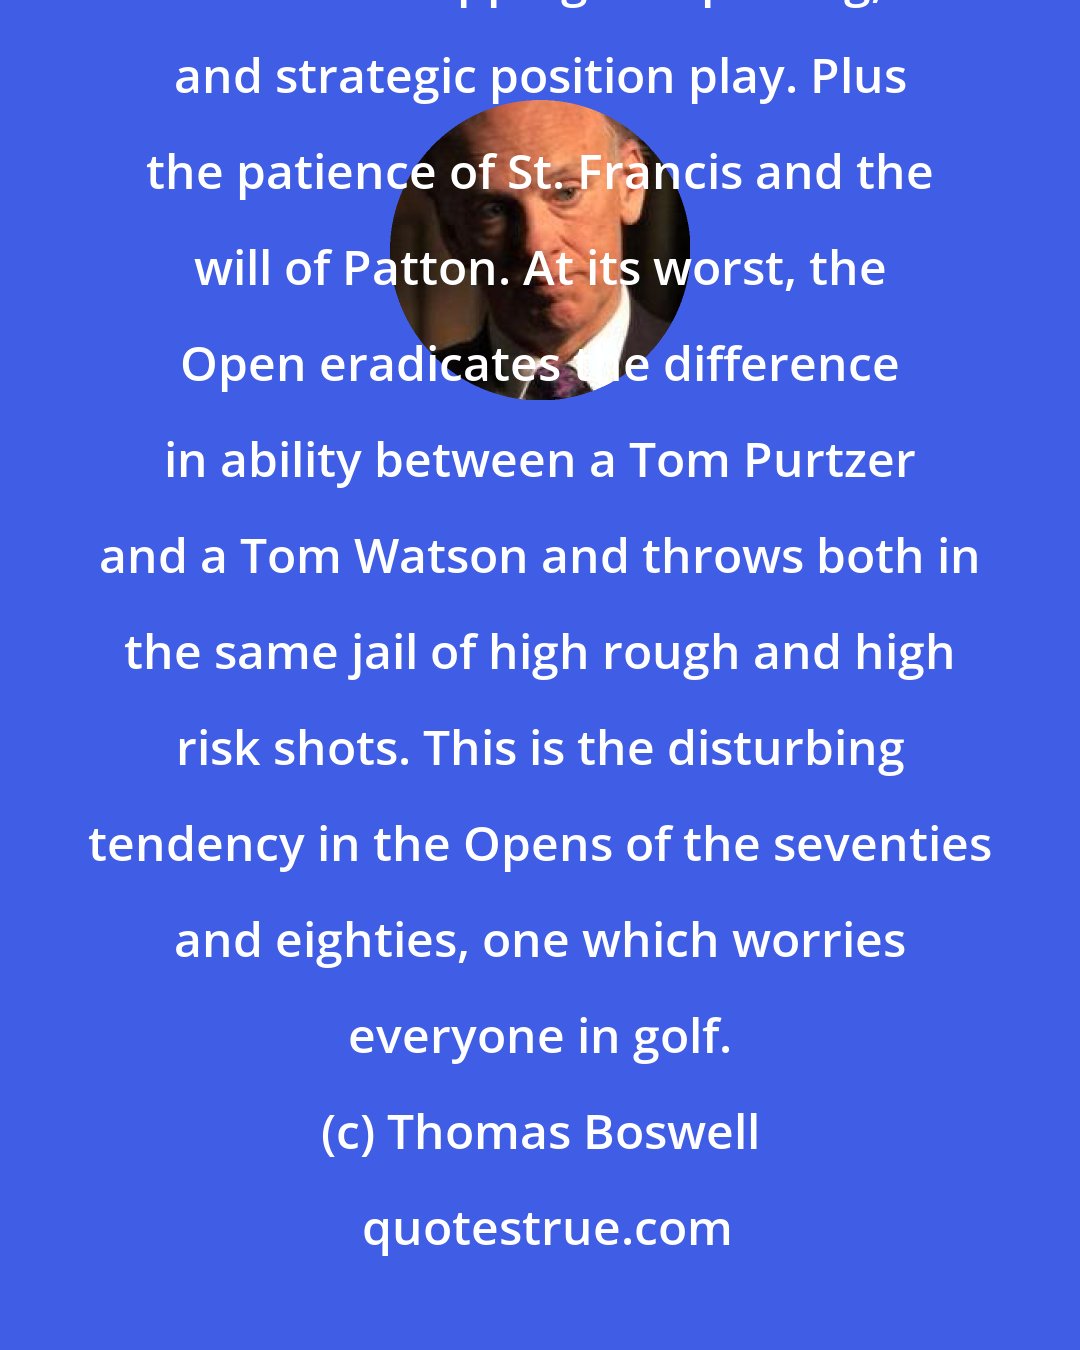 Thomas Boswell: At its best, the US Open demands straight drives, crisp iron shots, brilliant chipping and putting, and strategic position play. Plus the patience of St. Francis and the will of Patton. At its worst, the Open eradicates the difference in ability between a Tom Purtzer and a Tom Watson and throws both in the same jail of high rough and high risk shots. This is the disturbing tendency in the Opens of the seventies and eighties, one which worries everyone in golf.